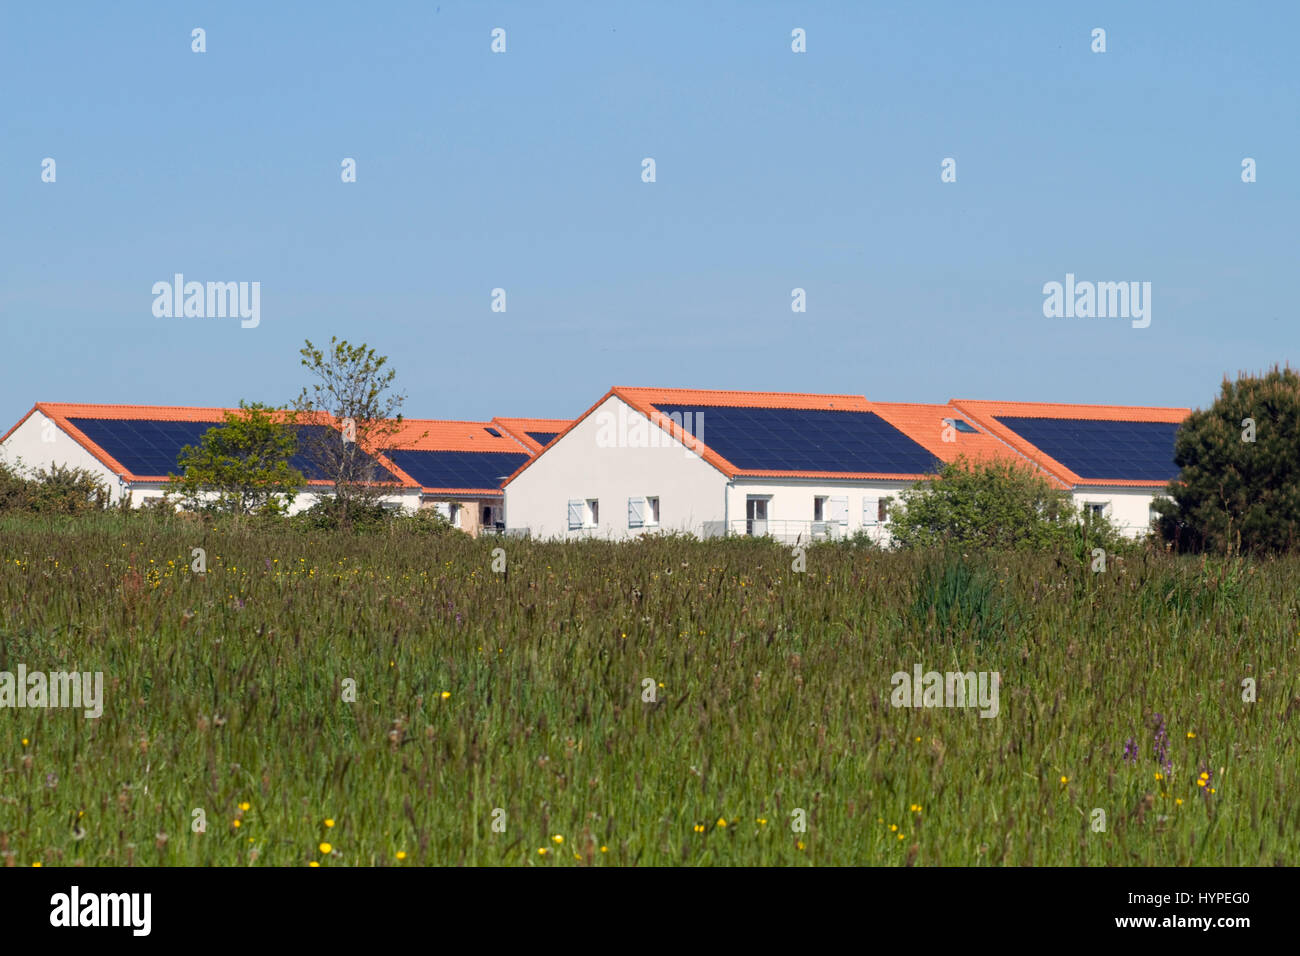 France, North-Eastern France, Brittany, Les Moutiers-en-Retz, solar panels on the roofops of collective dwellings Stock Photo